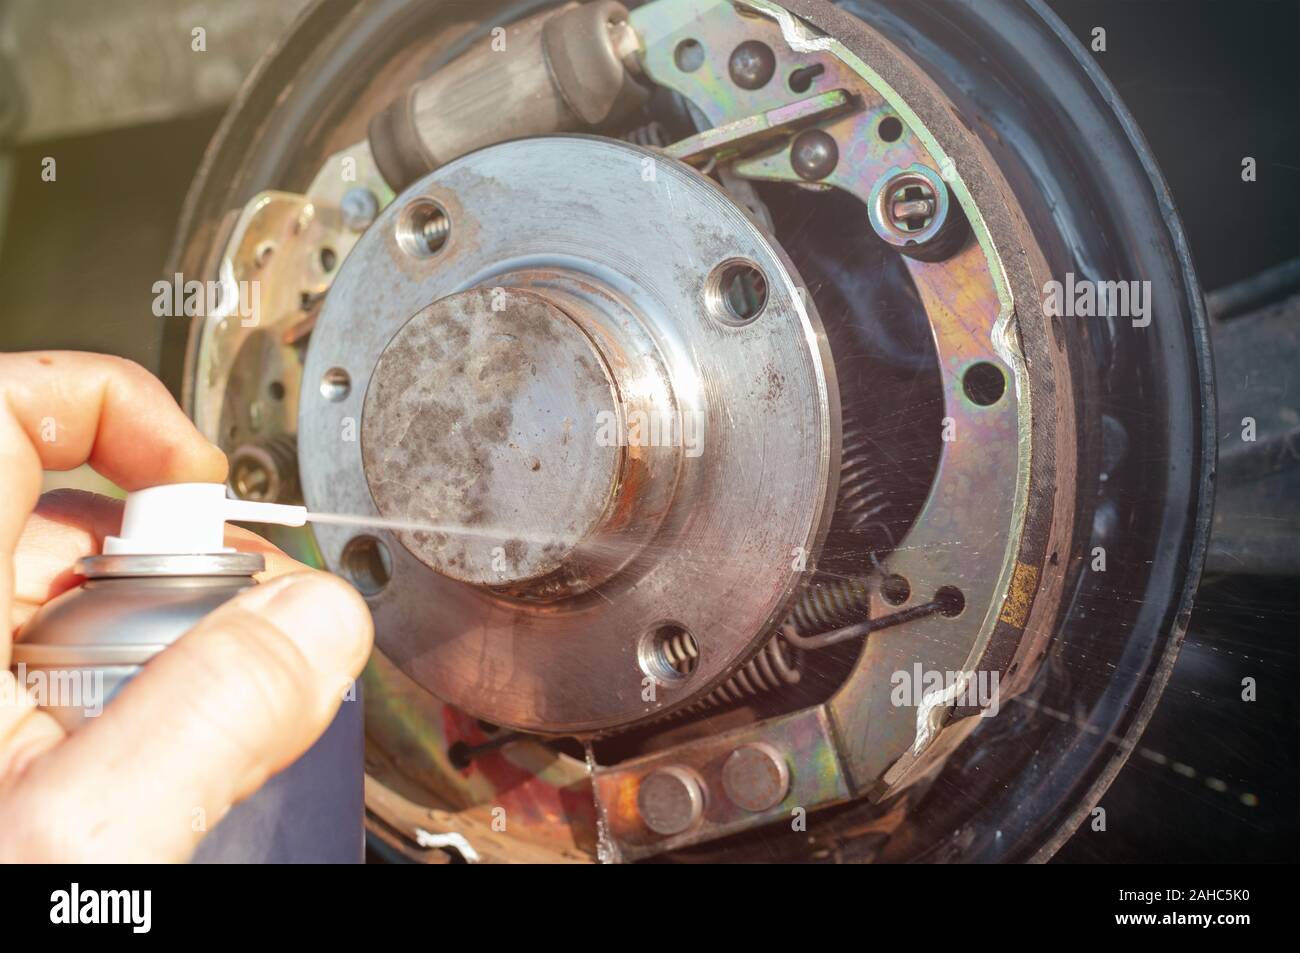 Car drum brake cleaning with spray Stock Photo - Alamy